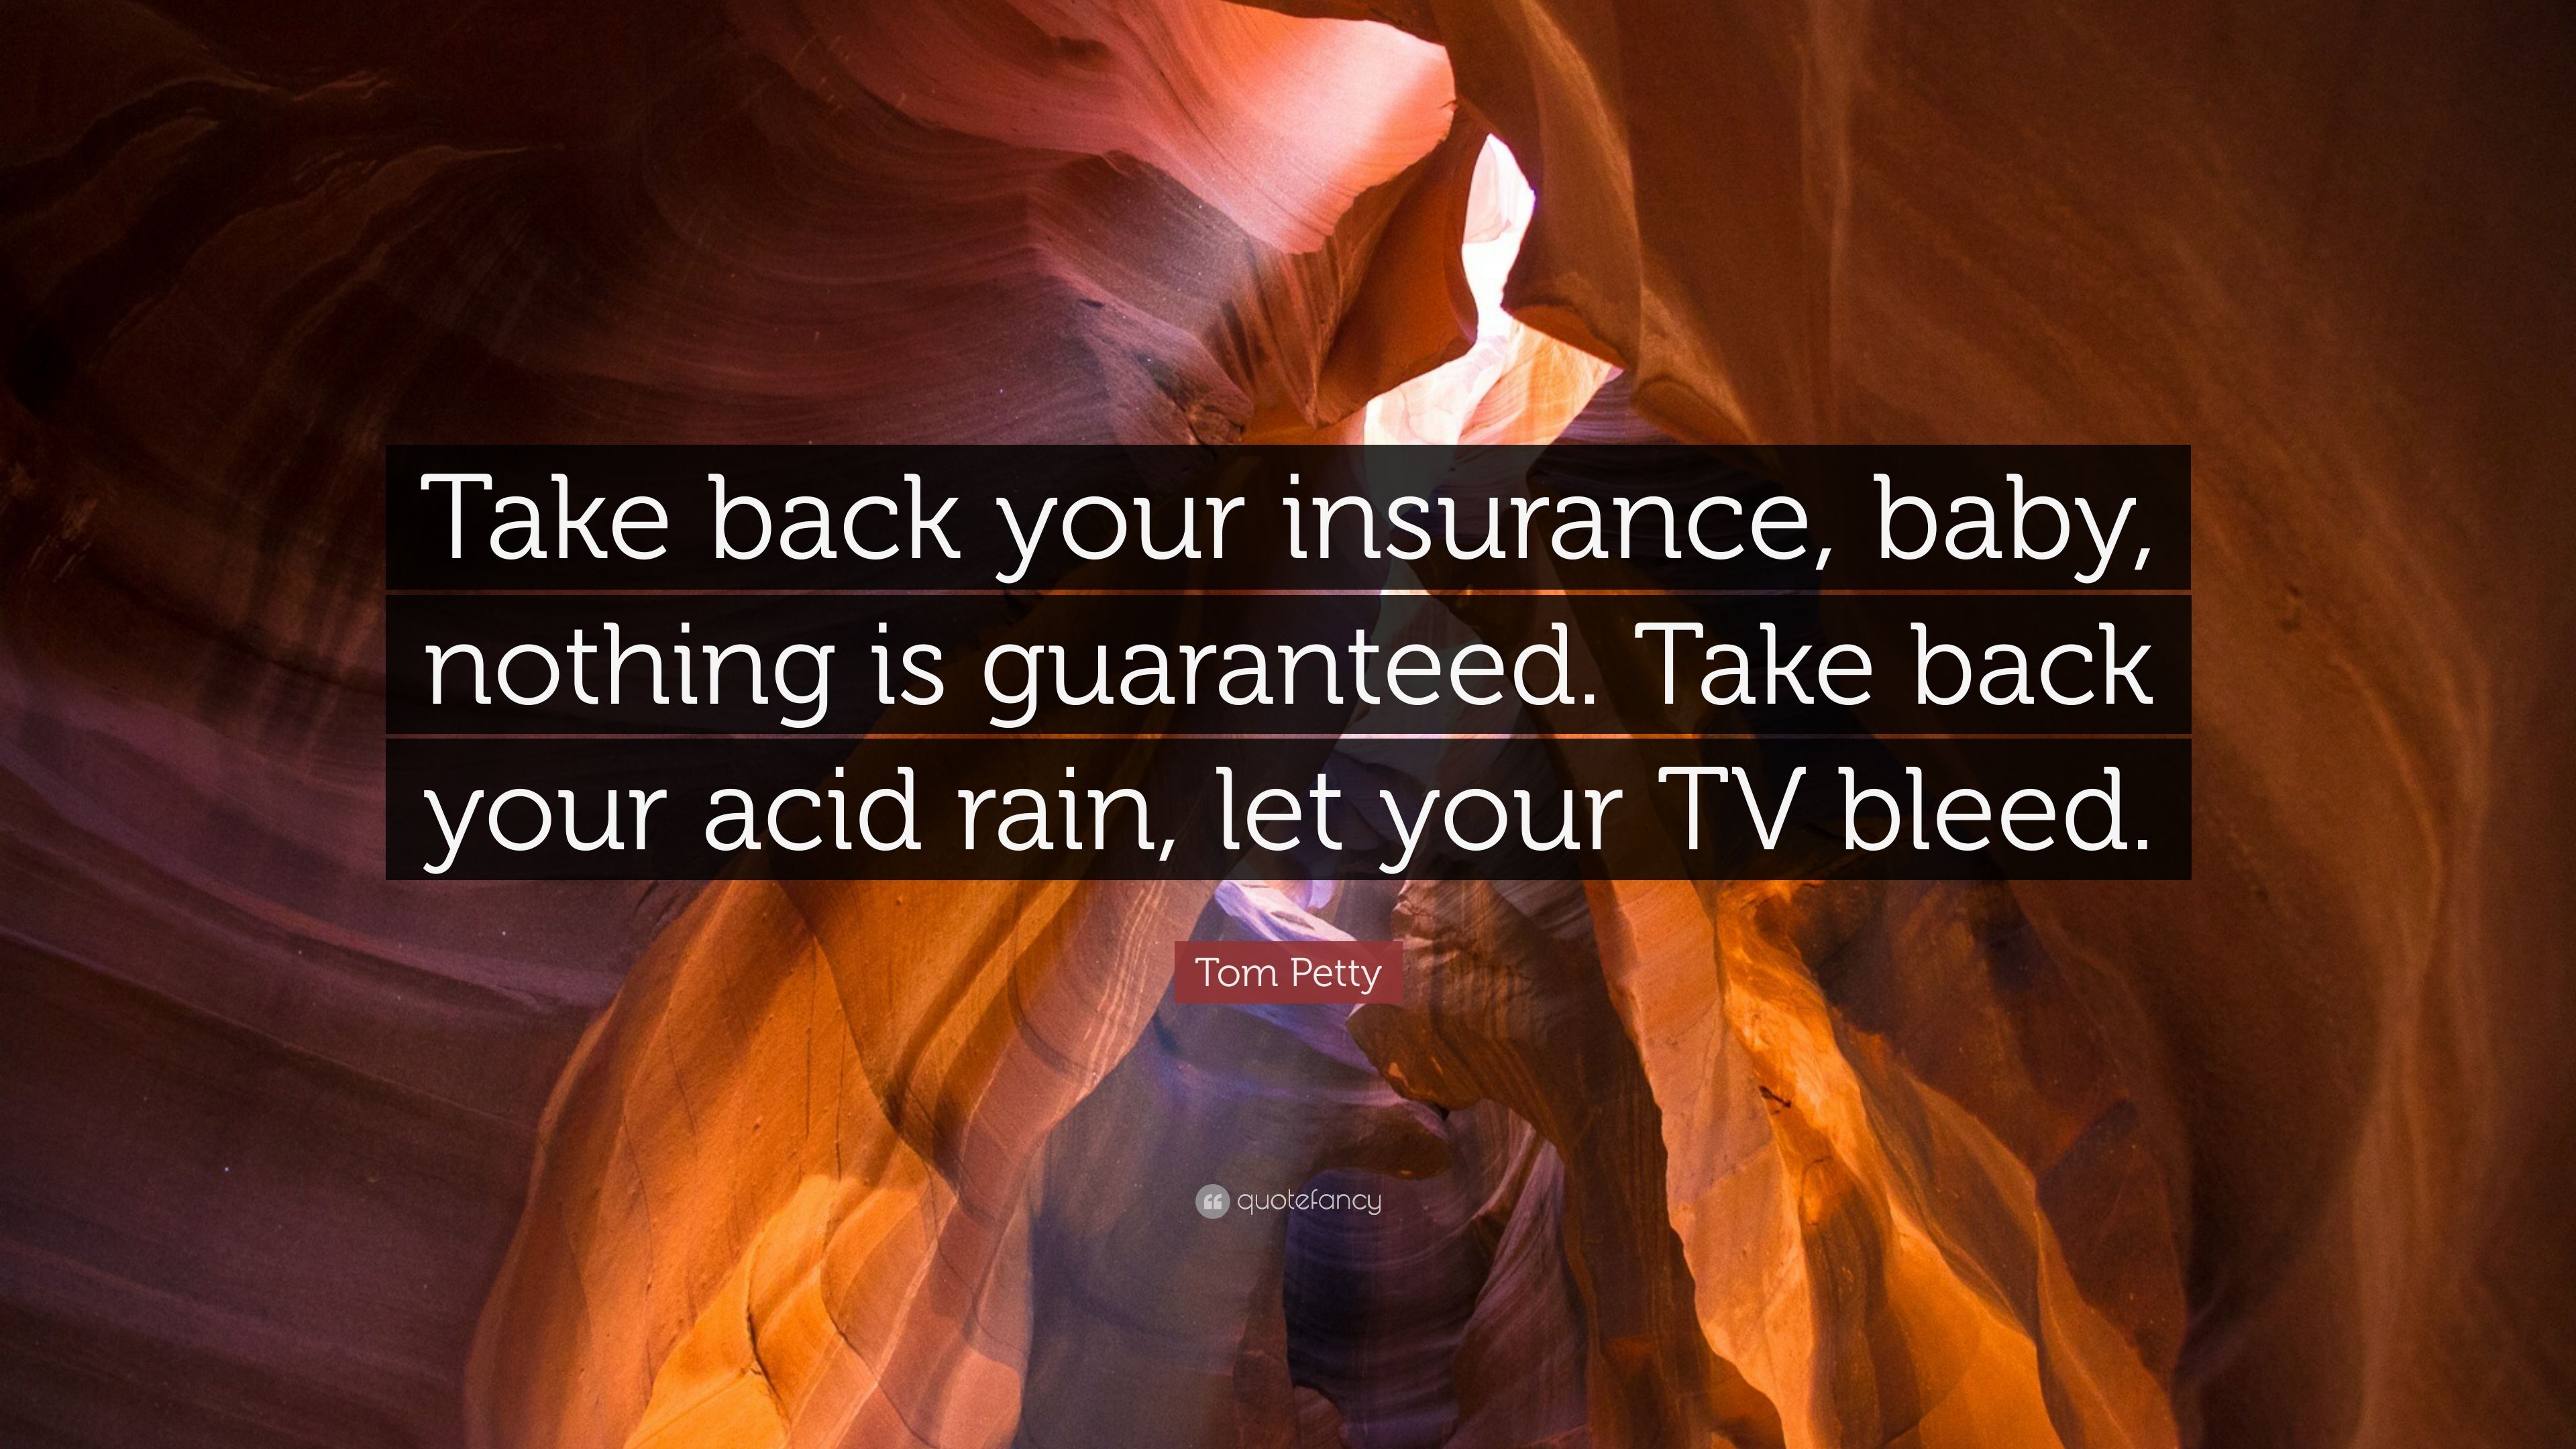 Tom Petty Quote: “Take back your insurance, baby, nothing is guaranteed. Take back your acid rain, let your TV bleed.” (7 wallpaper)